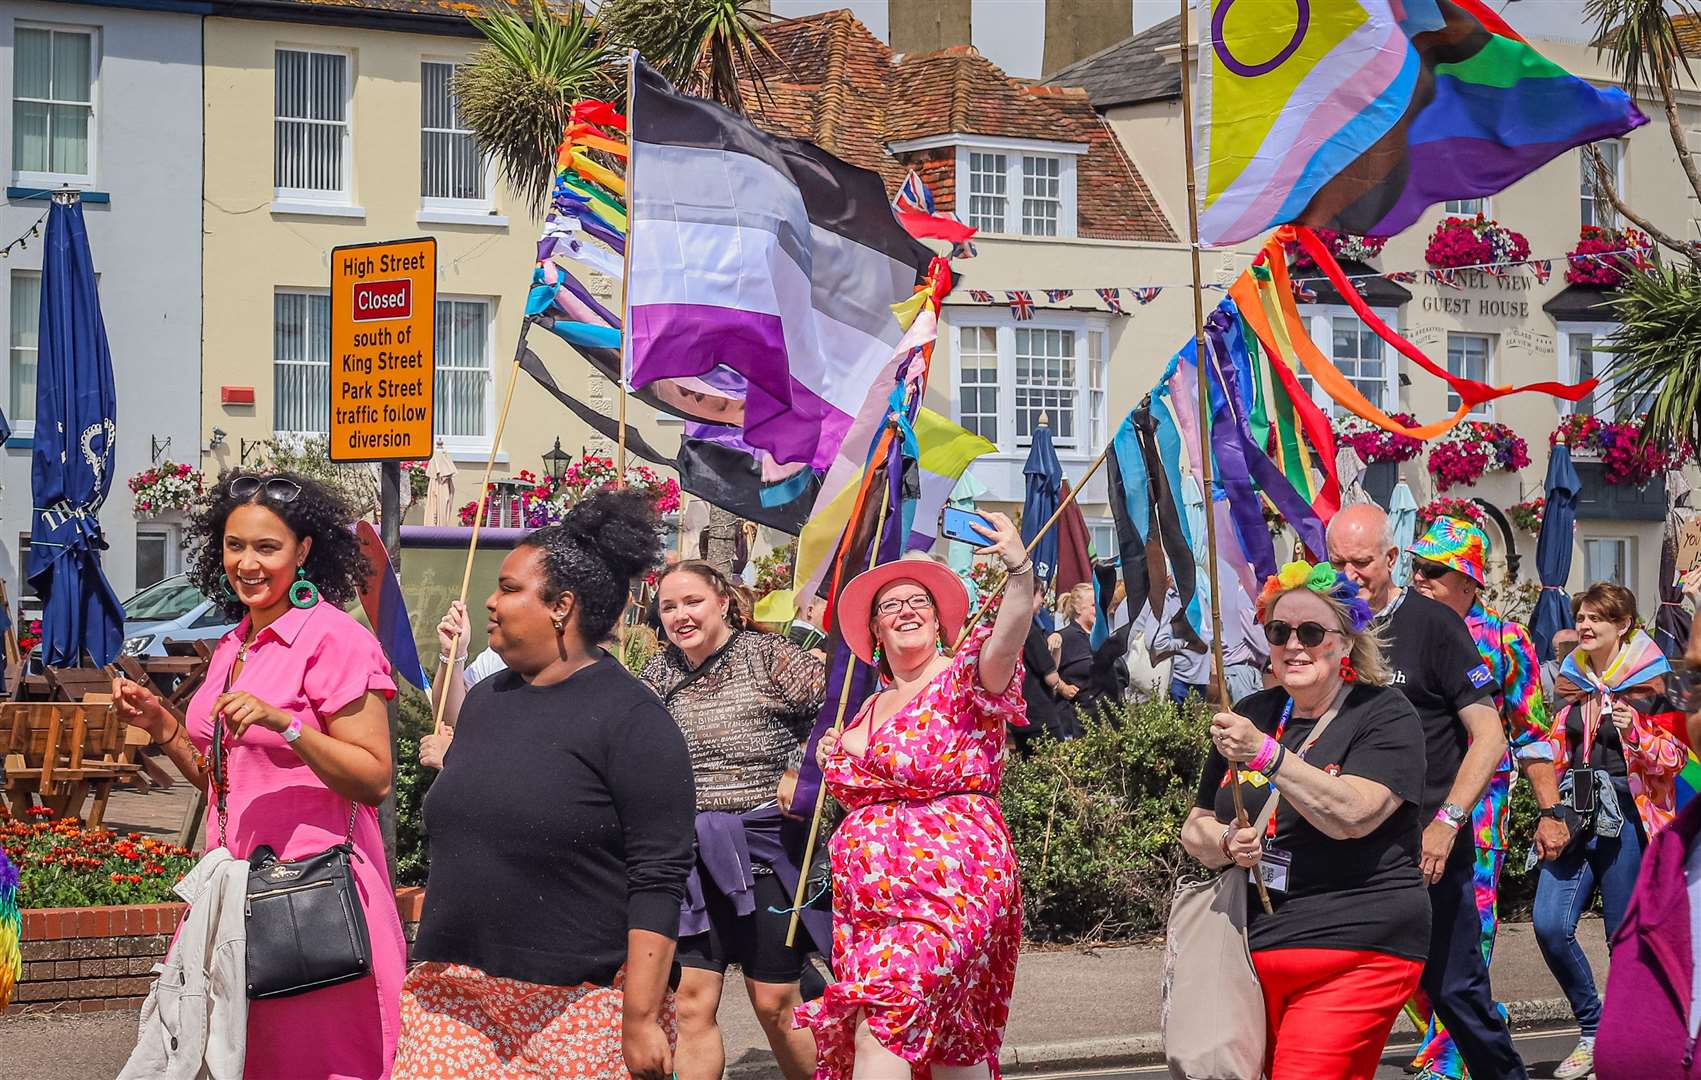 People joined the parade in Deal last year. Picture: John Doughty